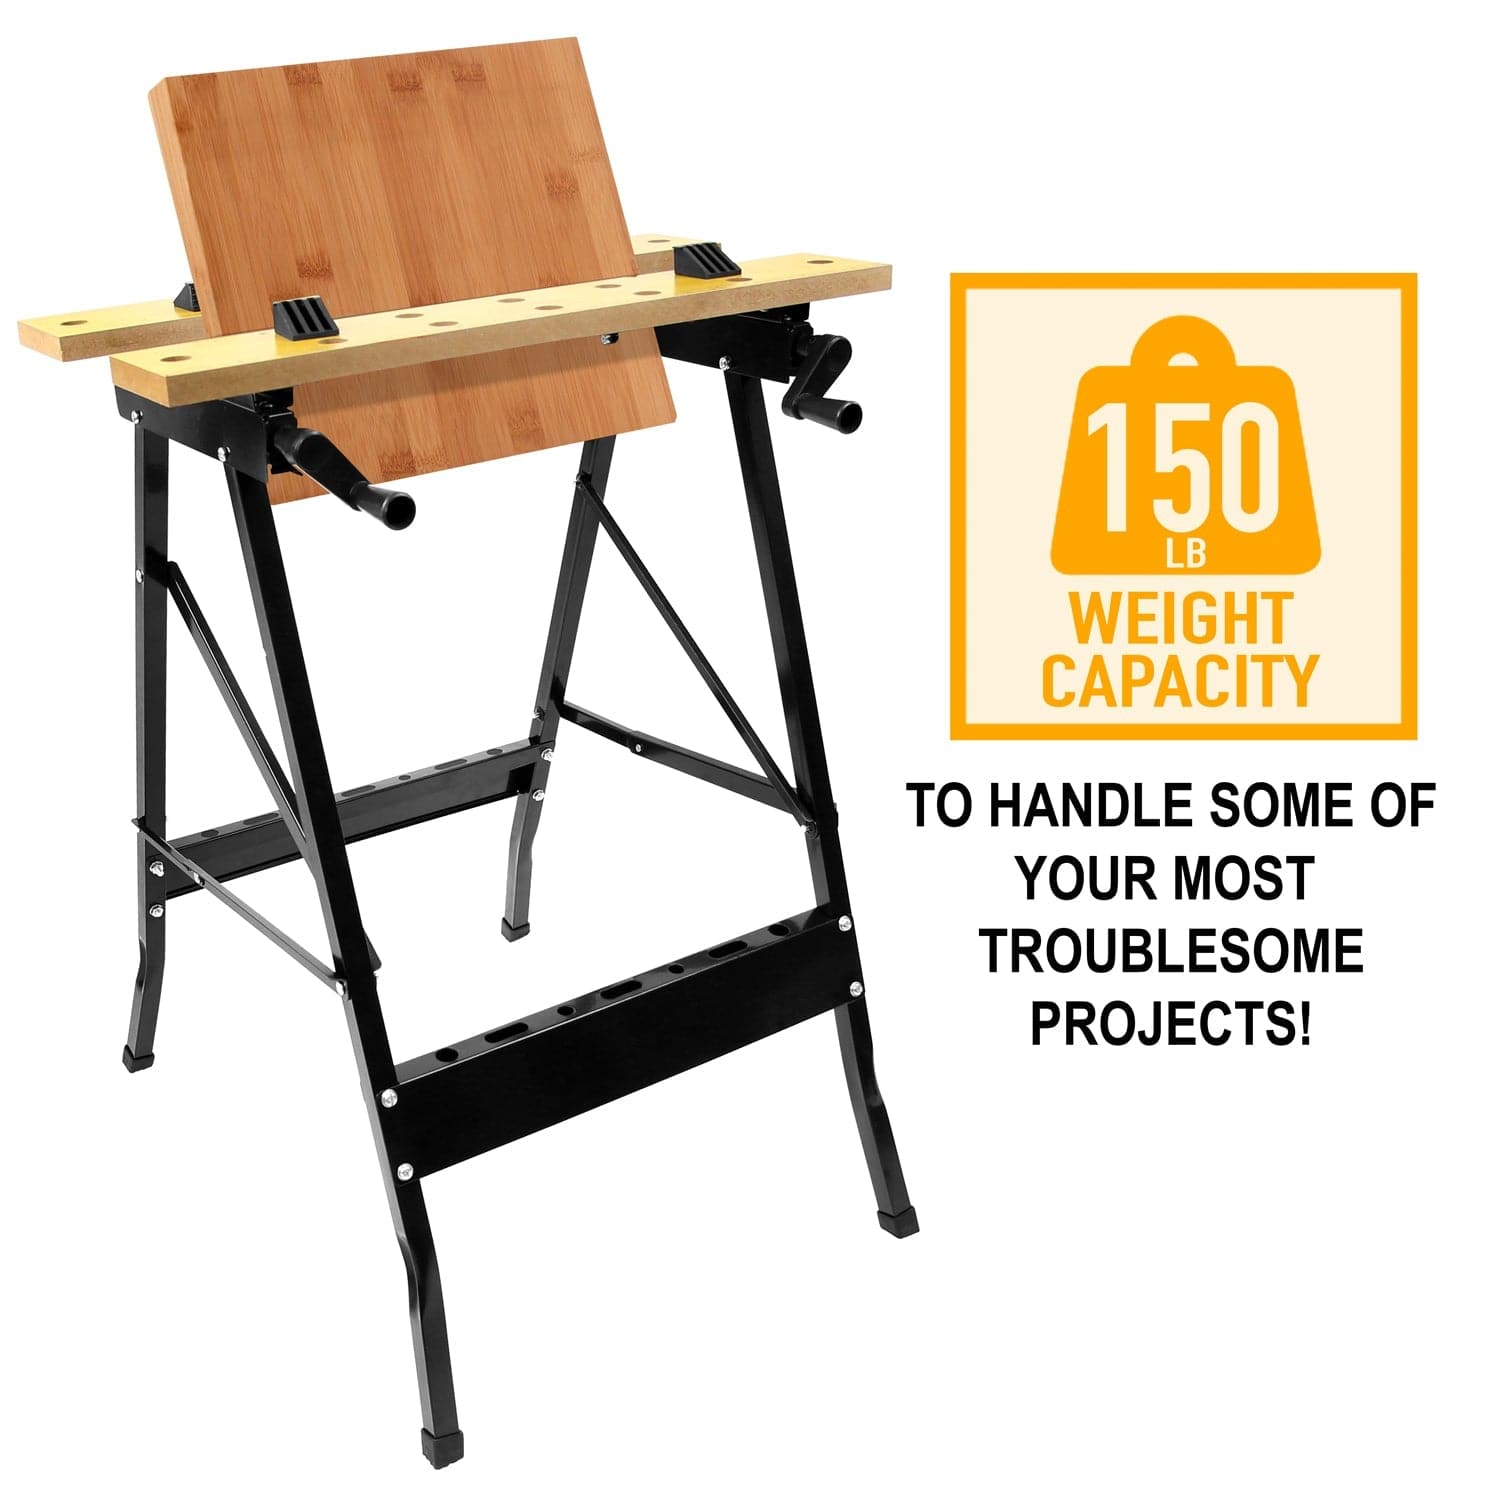 Portable Workbench with Clamps - Mount-It!